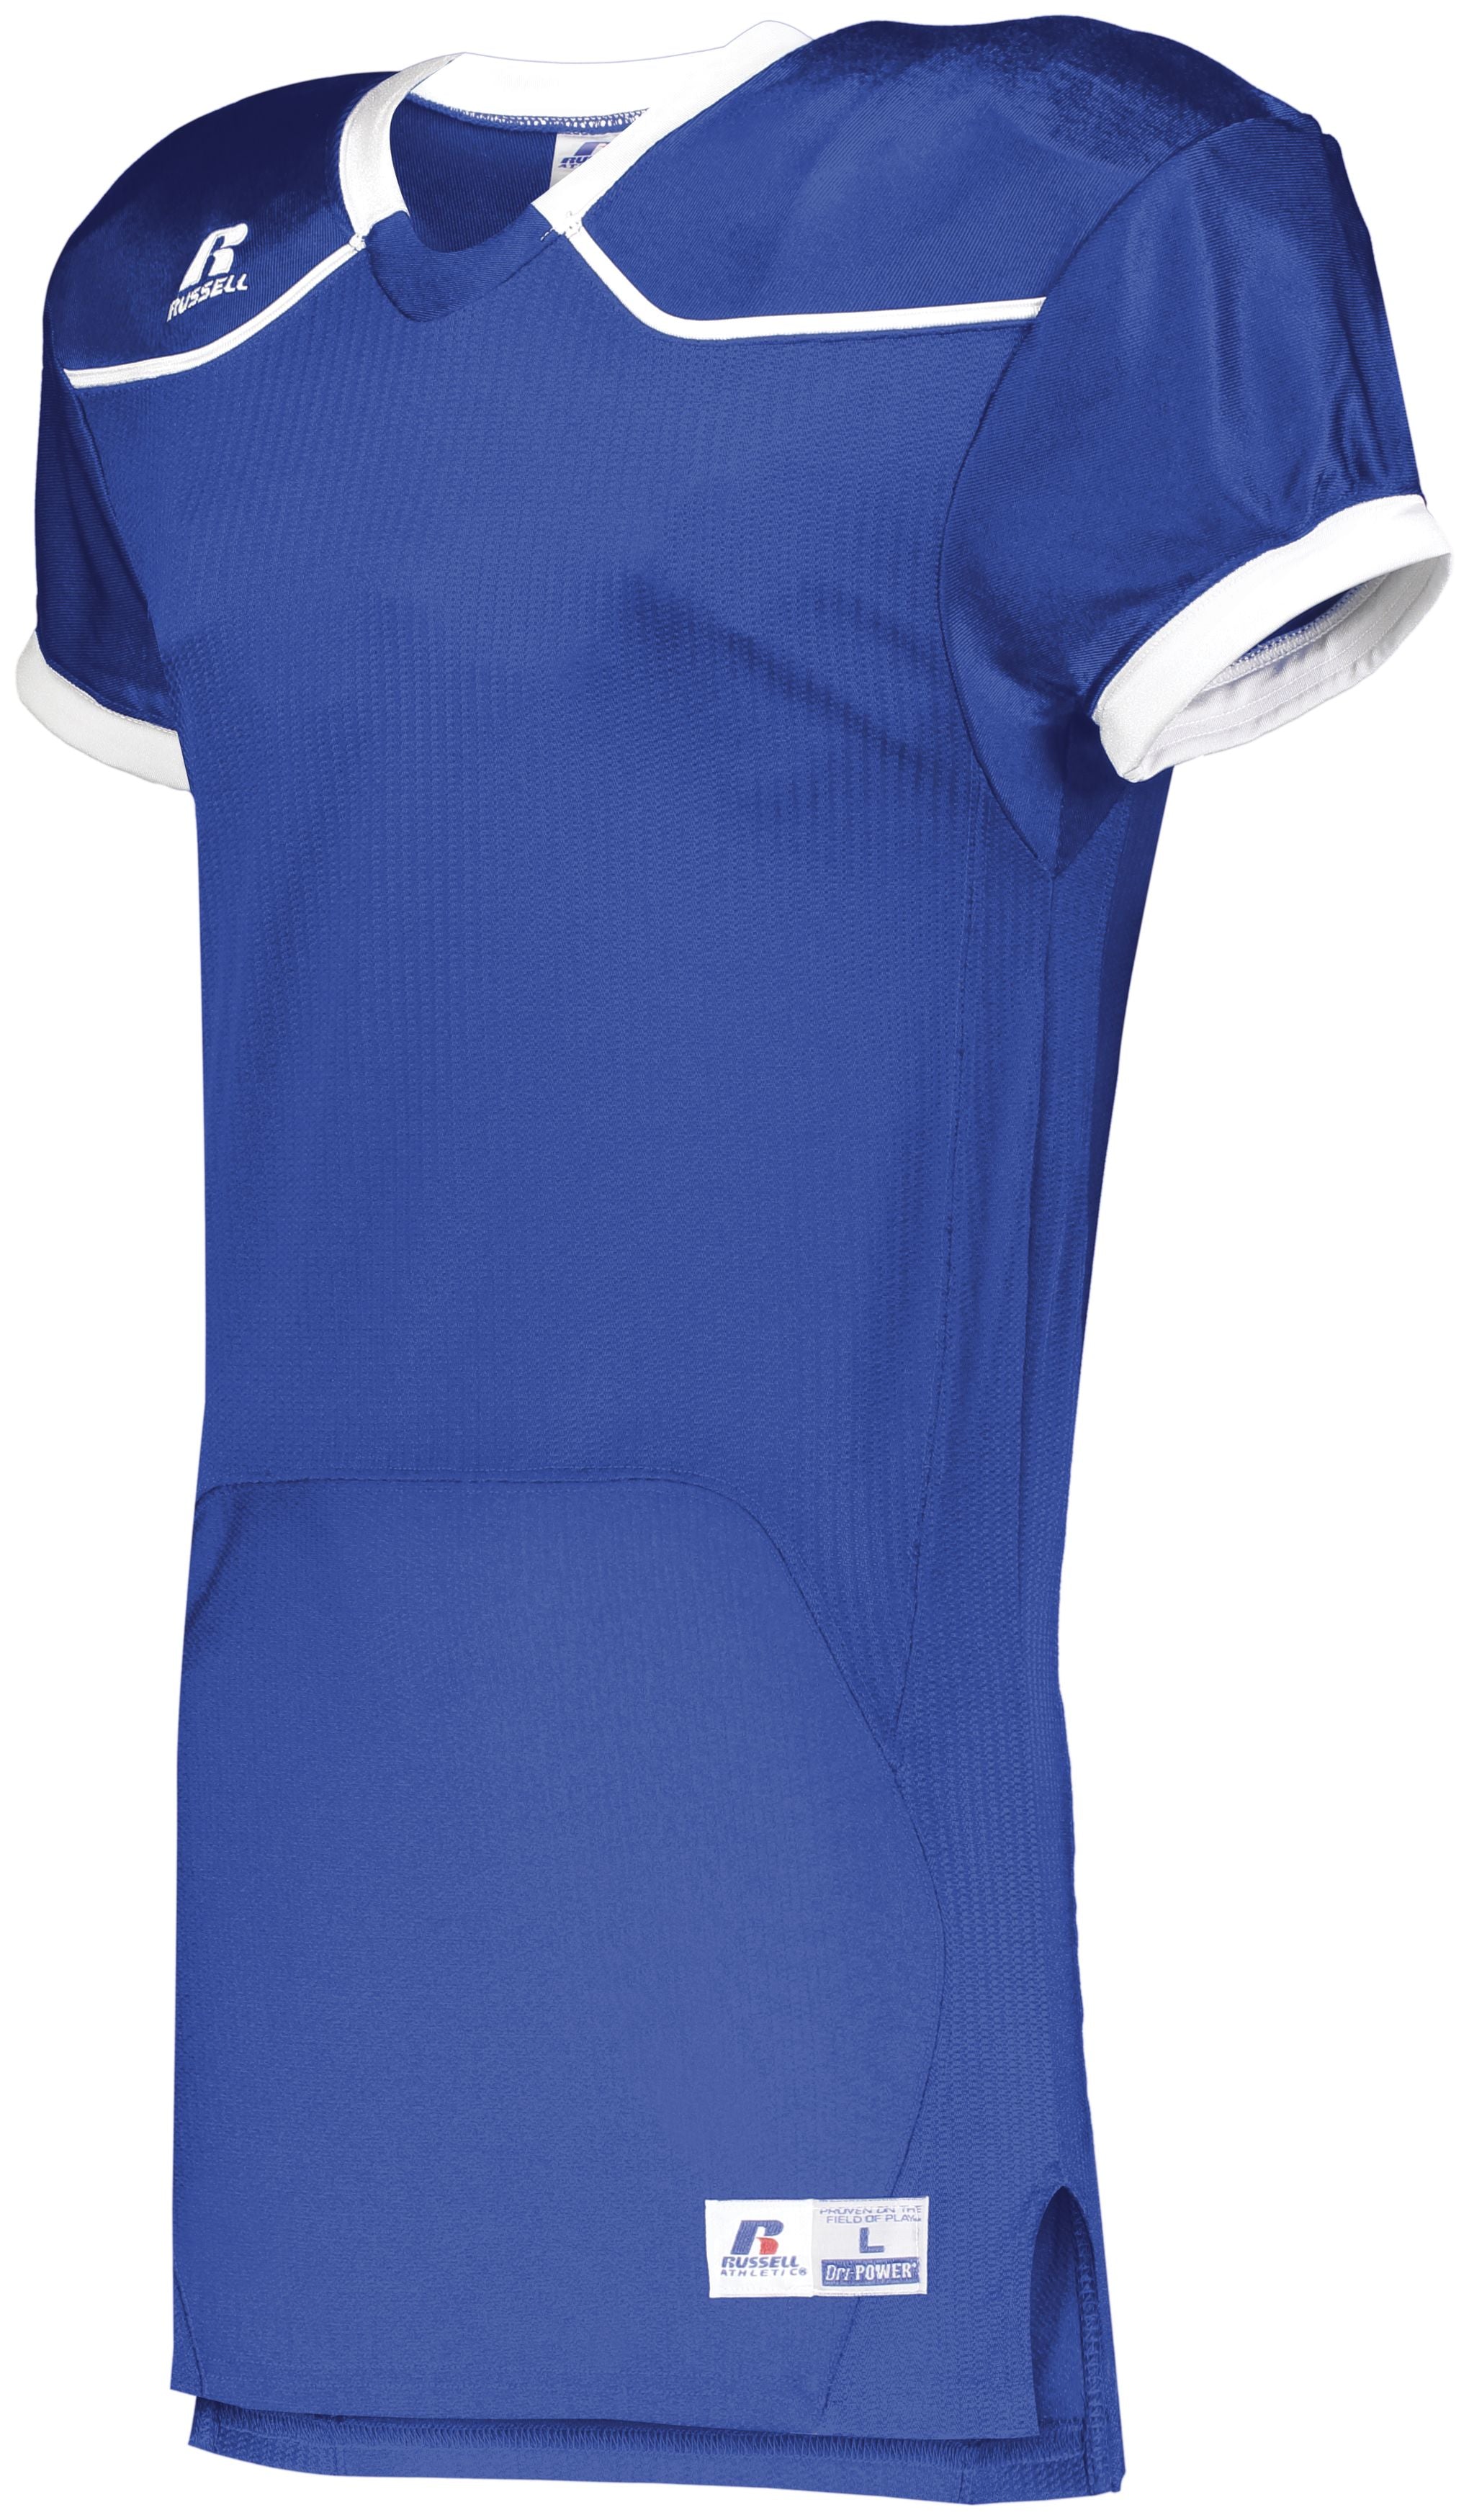 Russell Athletic Color Block Game Jersey (Home) in Royal/White  -Part of the Adult, Adult-Jersey, Football, Russell-Athletic-Products, Shirts, All-Sports, All-Sports-1 product lines at KanaleyCreations.com